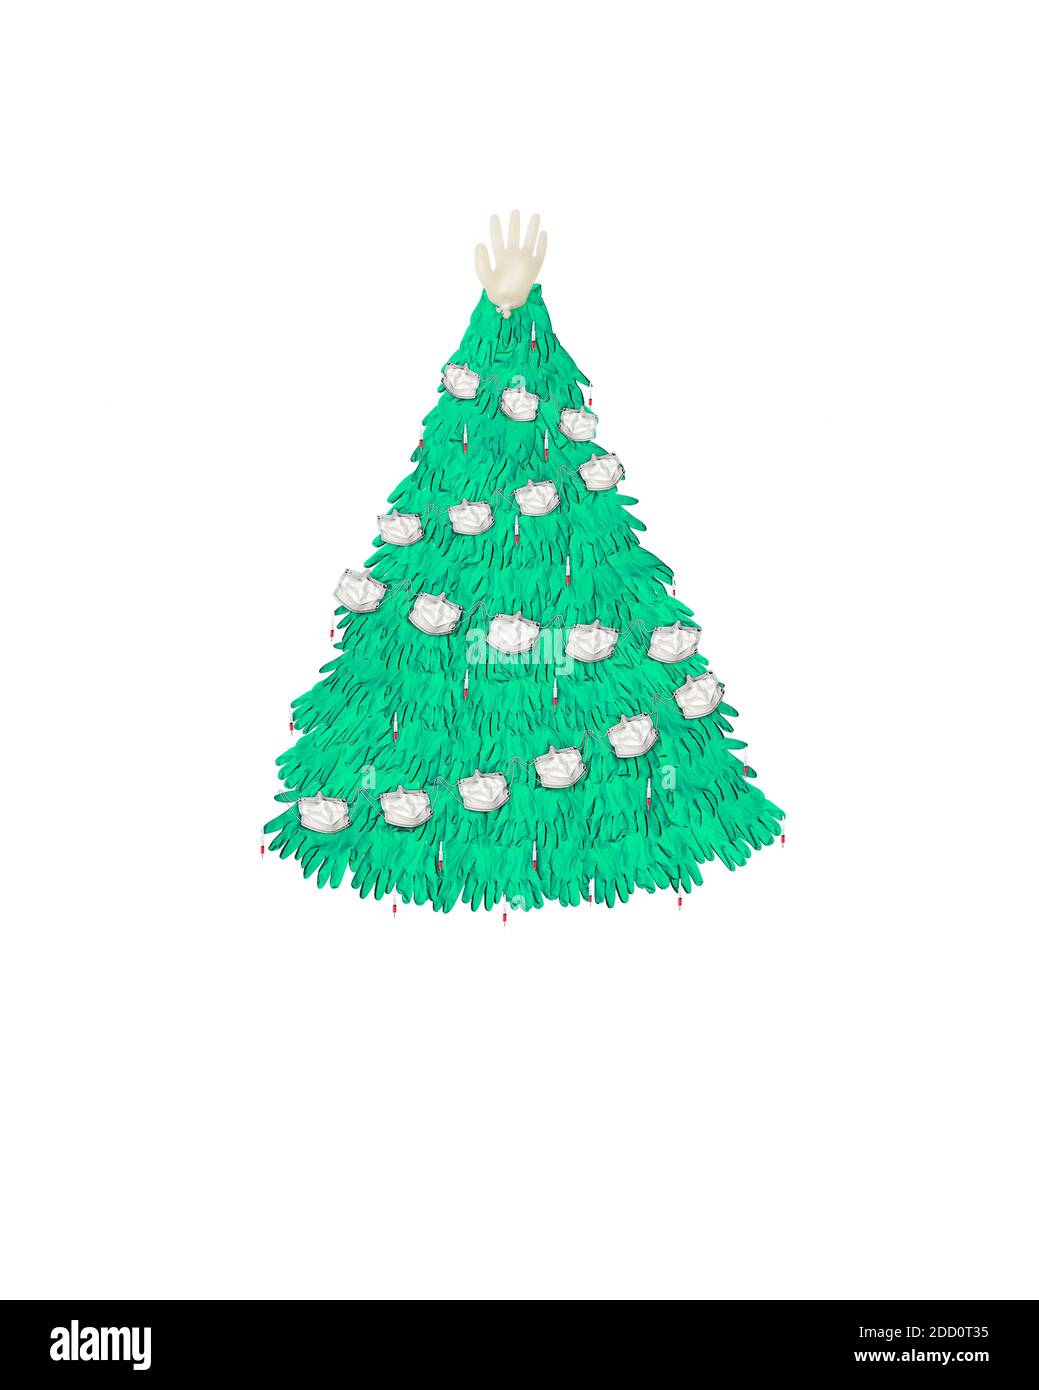 Covid Christmas Tree made from disposable gloves facemasks and syringes on white background Stock Photo